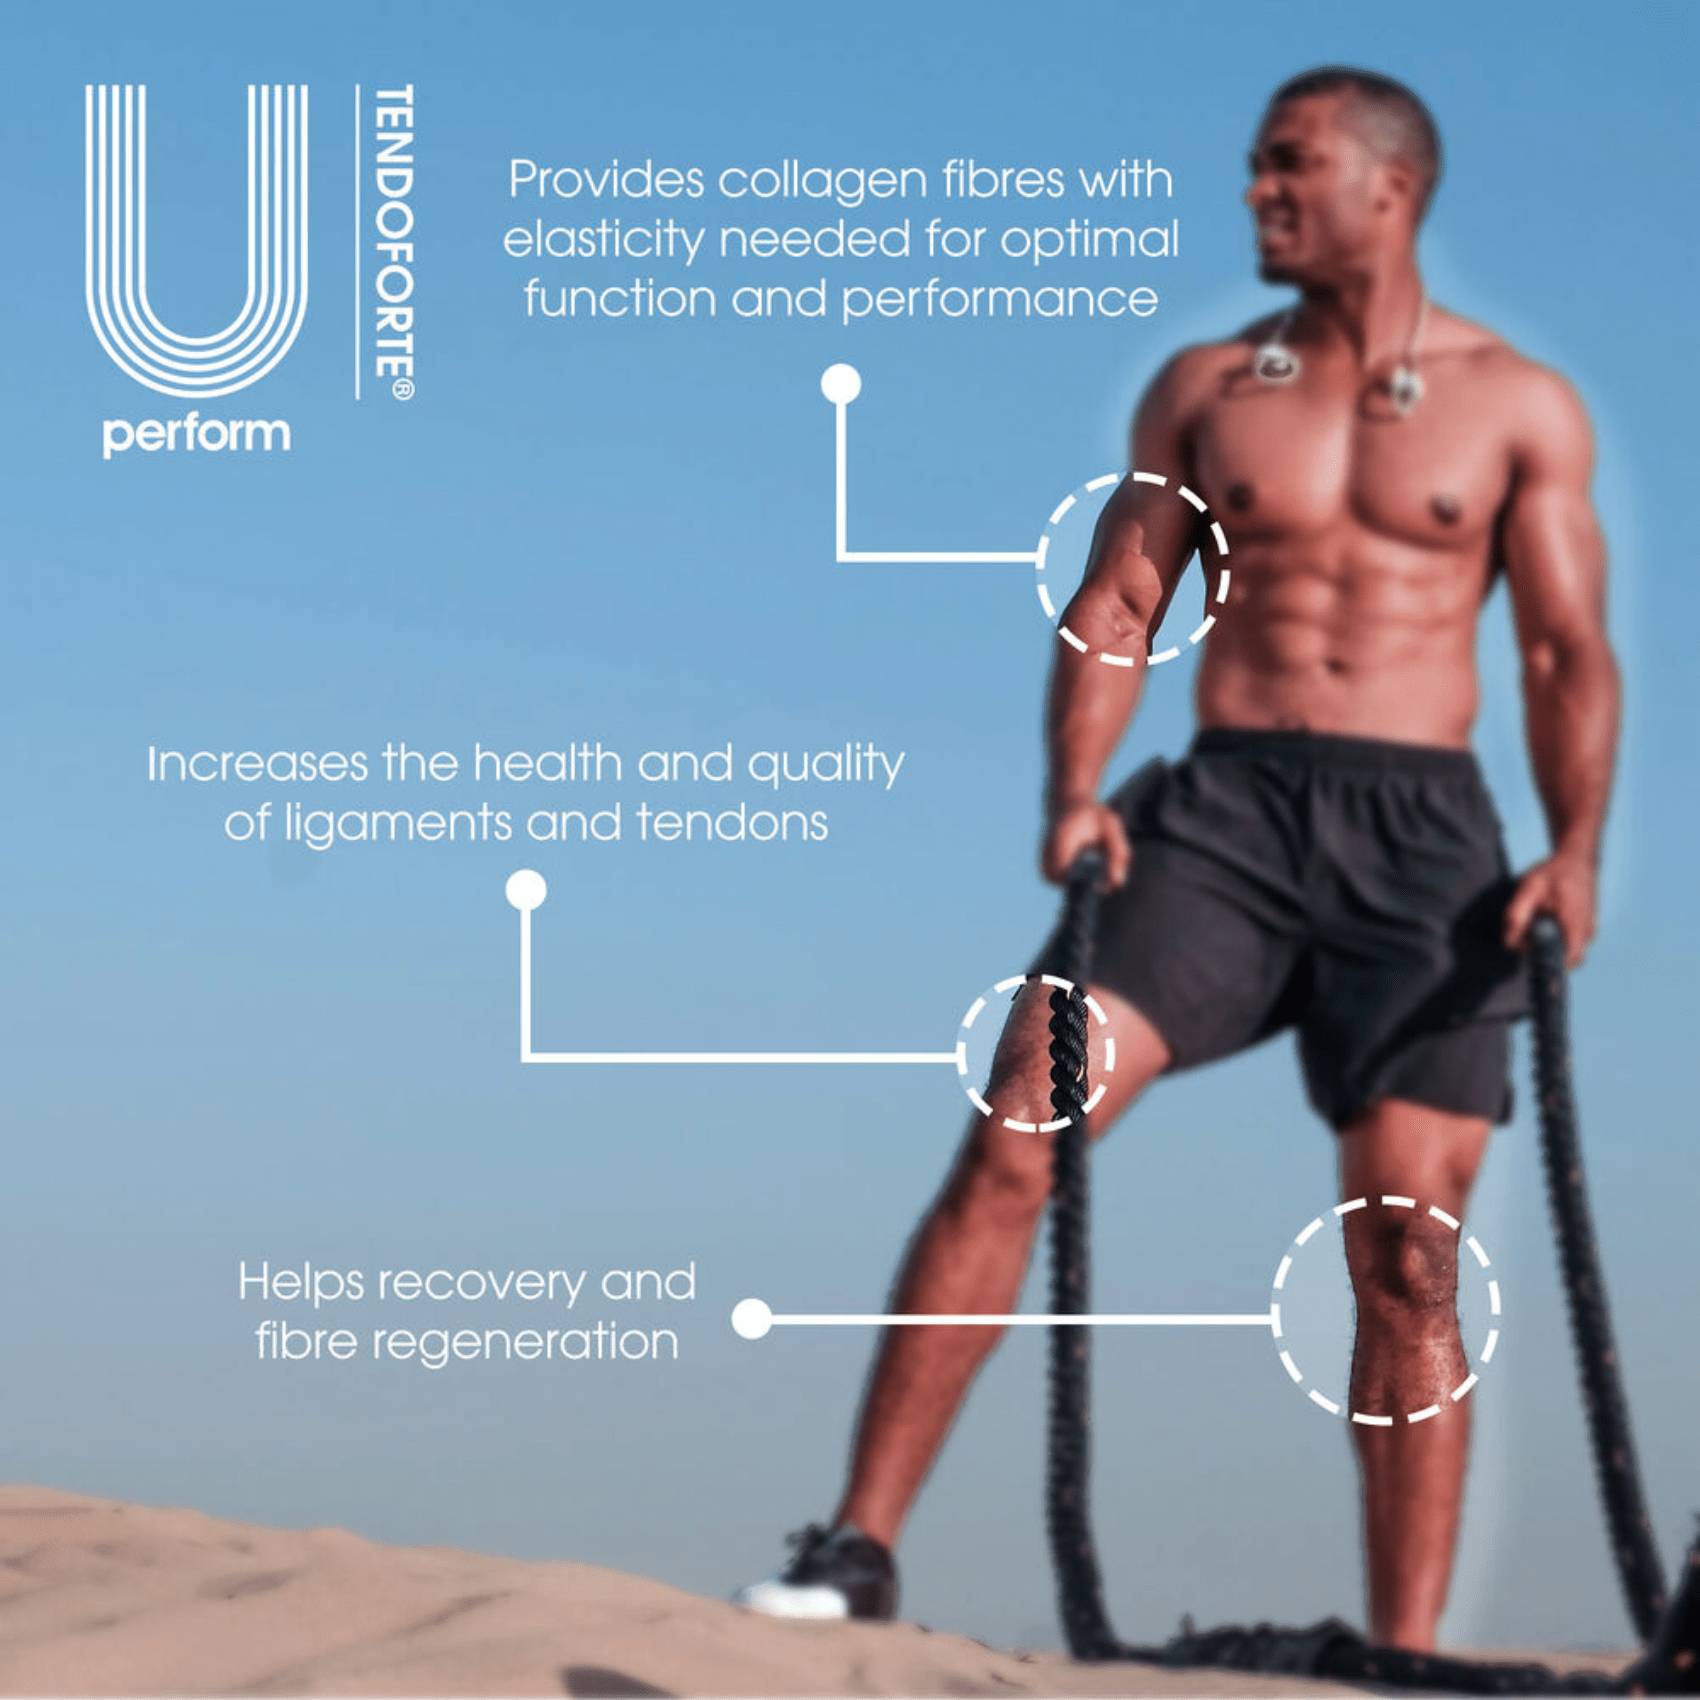 Topless man in gym shorts standing on top of hill under a blue sky holding battle ropes after a workout - U Perform TENDOFORTE Bioactive Collagen Peptides Features & Benefits graphics